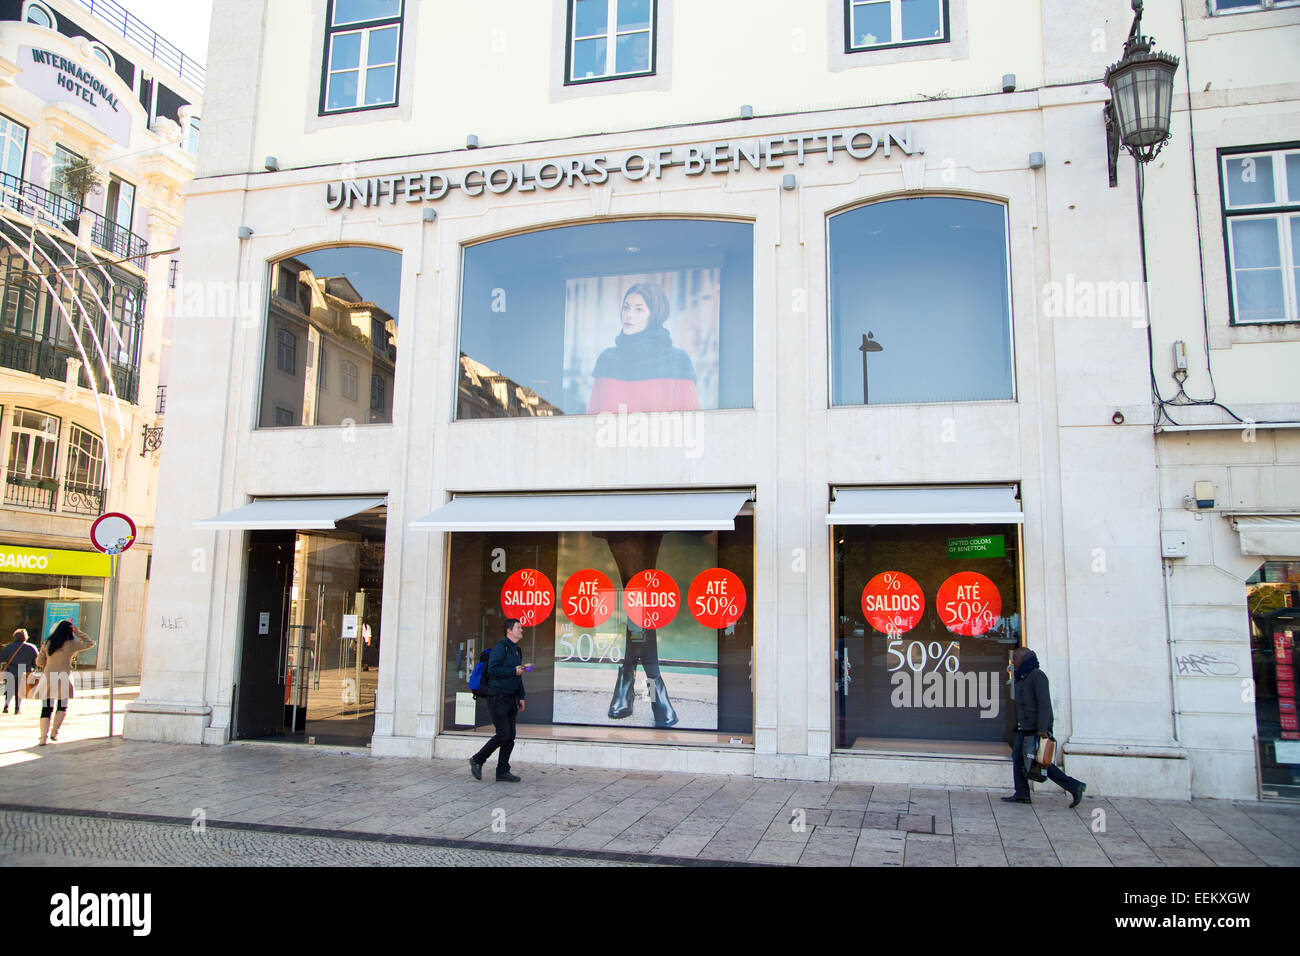 LISBON, PORTUGAL- January 12th, 2015: The exterior of Benetton in Lisbon on the 12th of january 2015 Lisbon, Portugal. Benetton Stock Photo